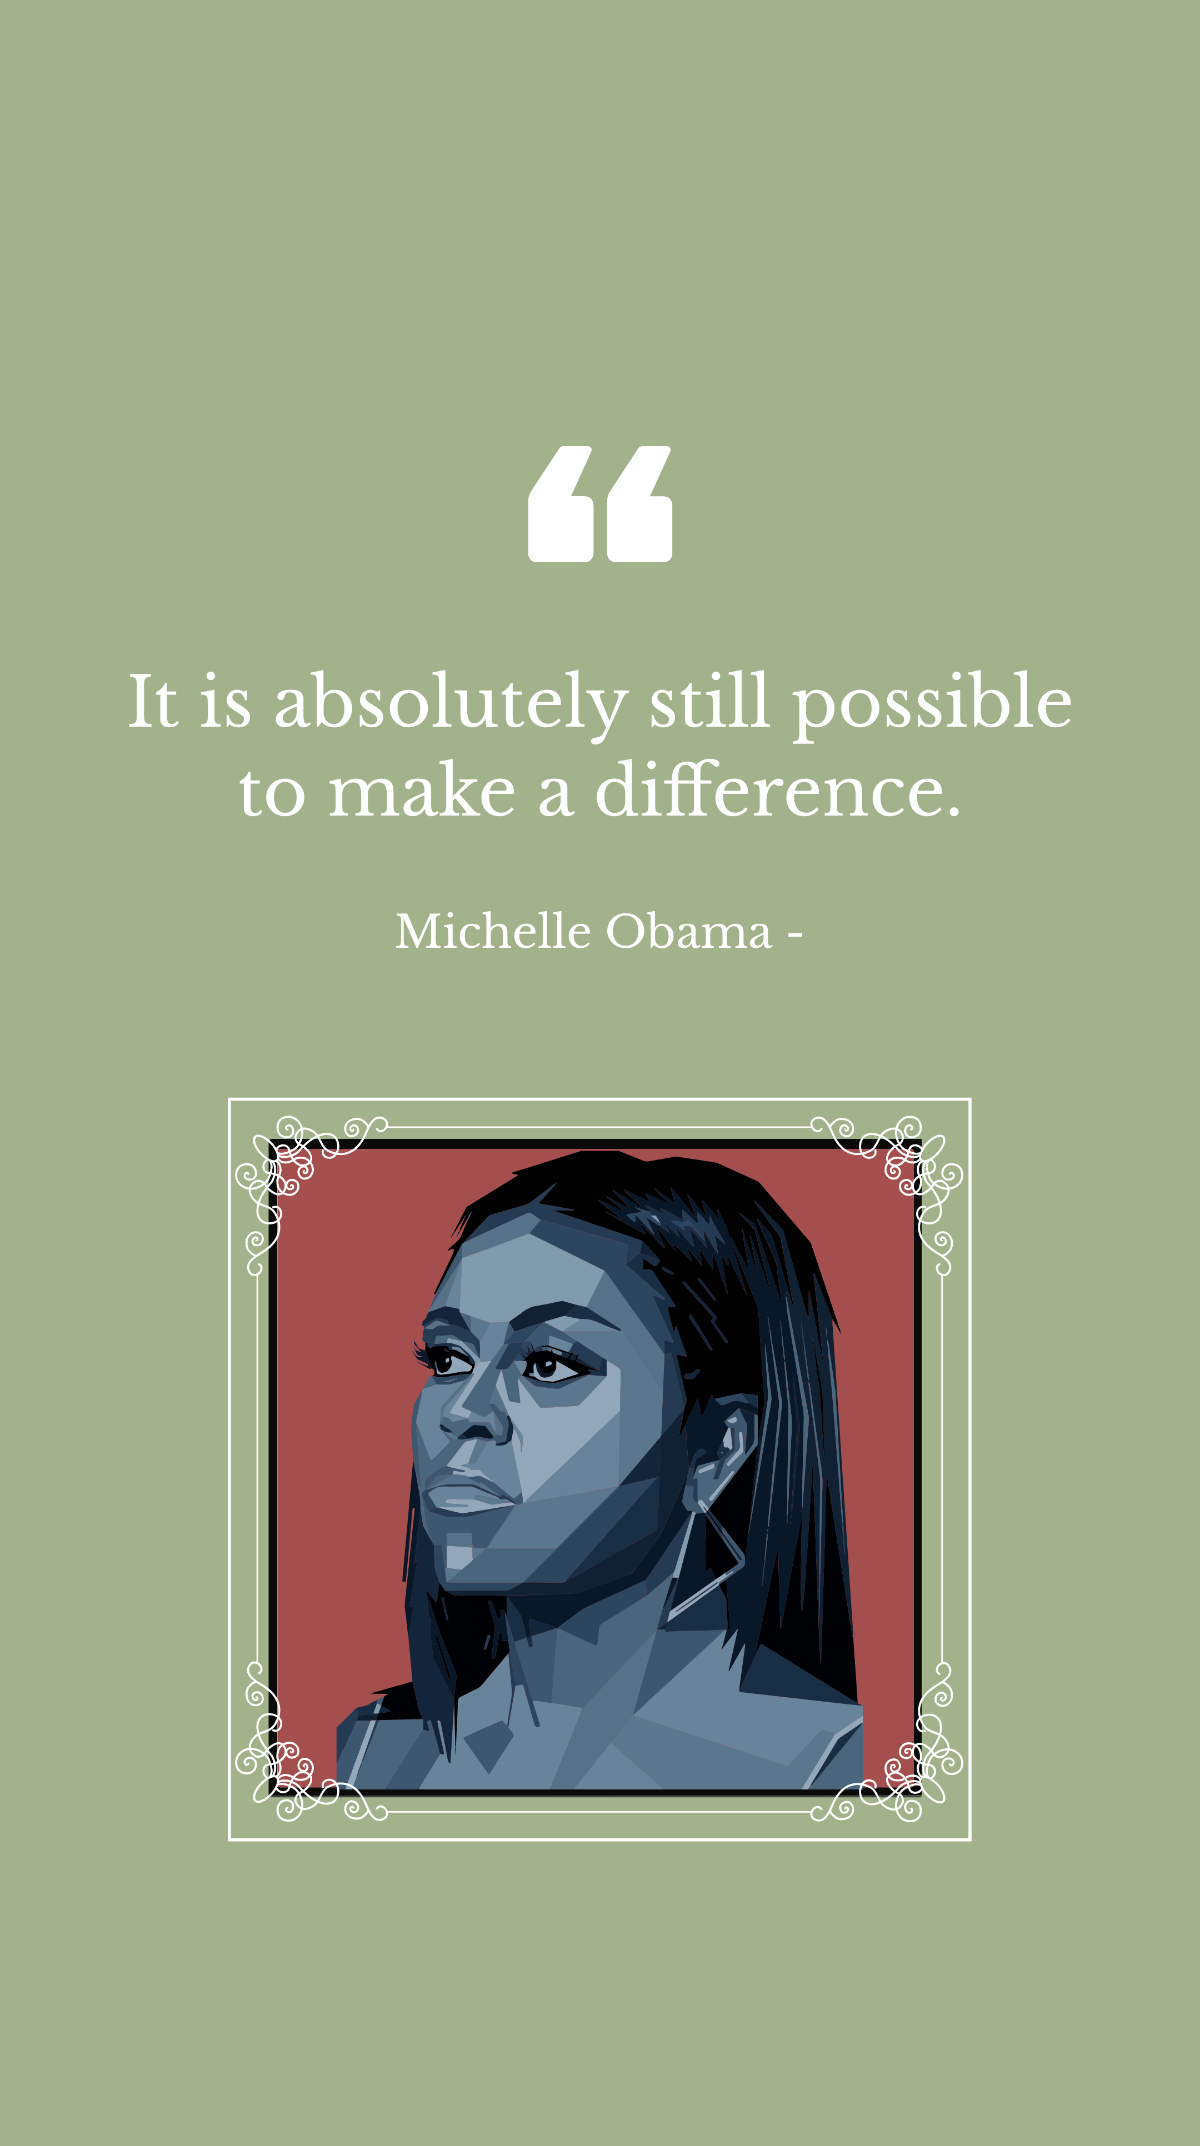 Michelle Obama - It is absolutely still possible to make a difference.